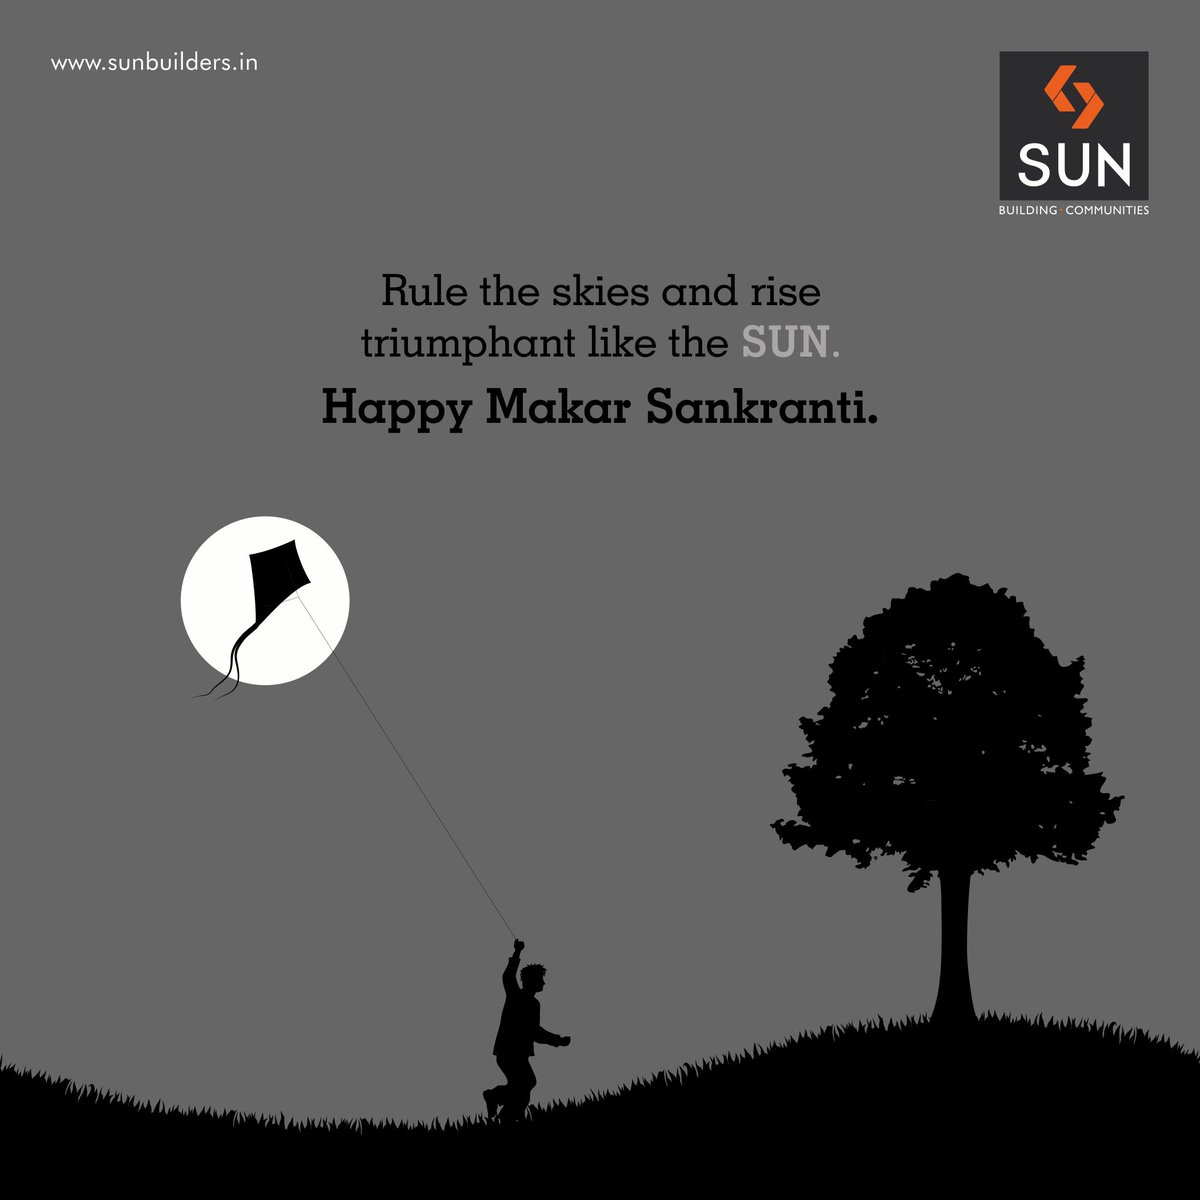 Did you know? Makar Sankranti festival is devoted to the Sun God and his visit to his son,Shani. Let's Celebrate it. https://t.co/PrE8WveBgj